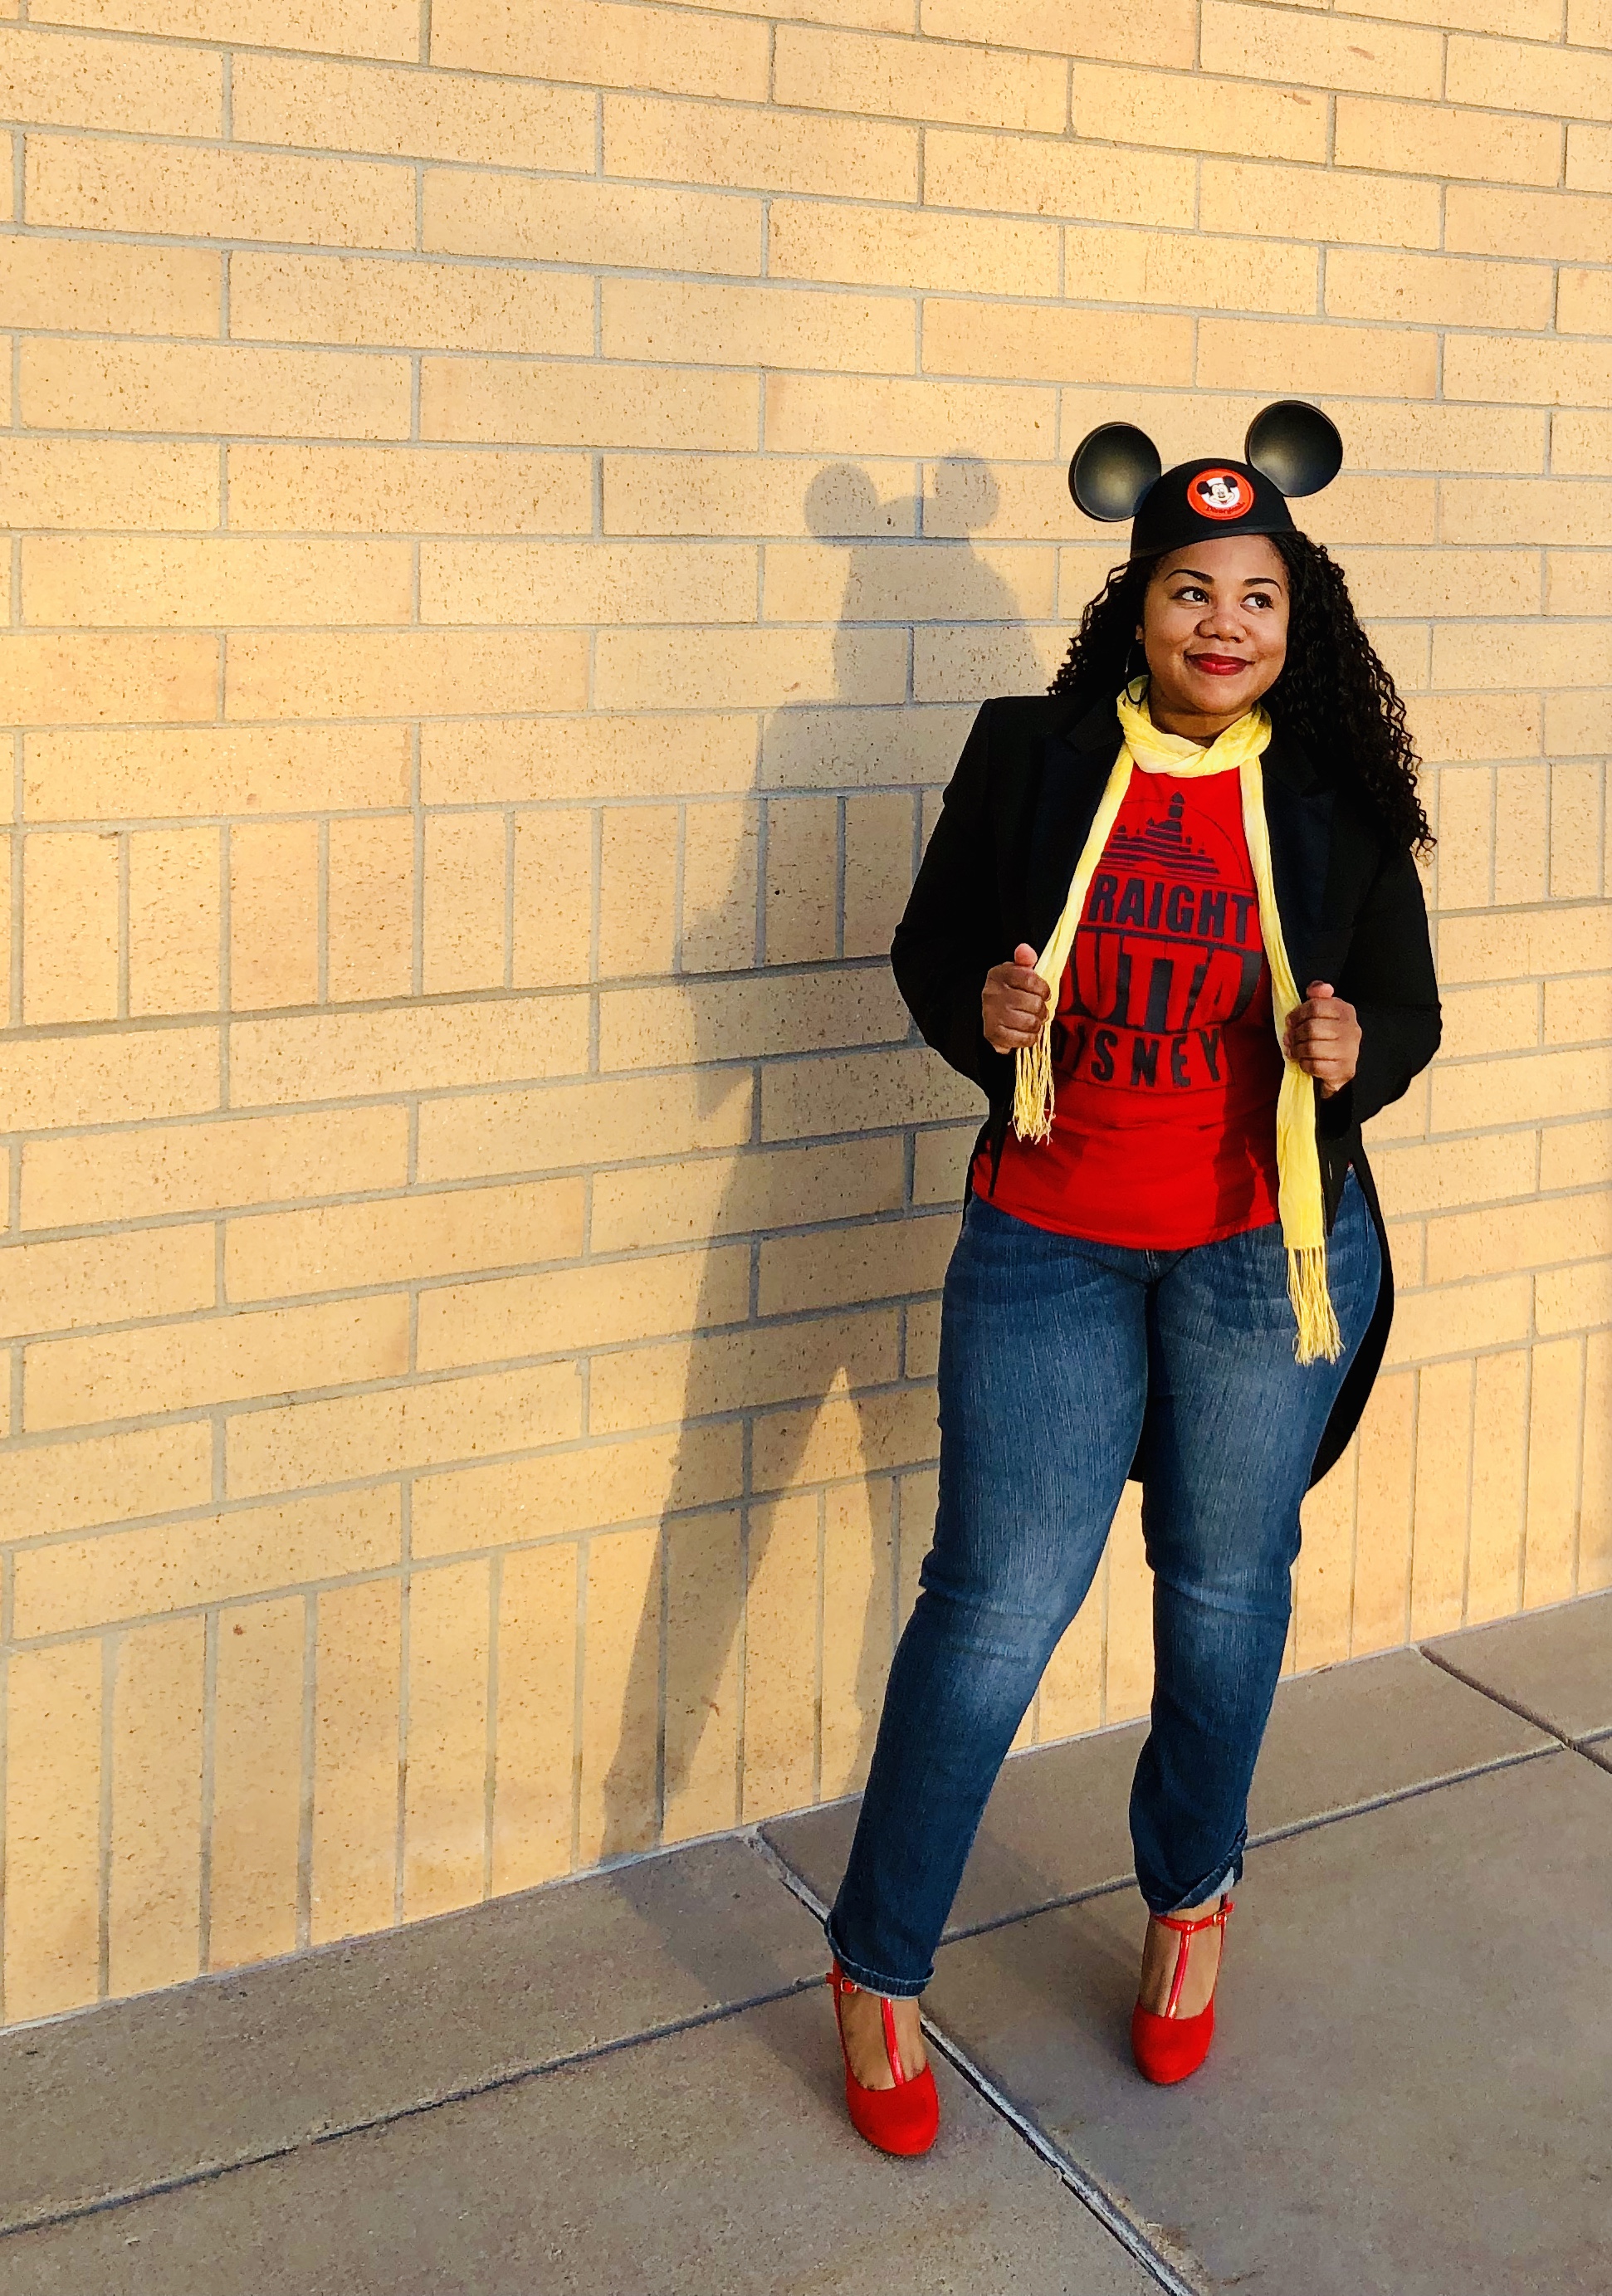 Dressin for a day at Disneyland — Xtra Dressin